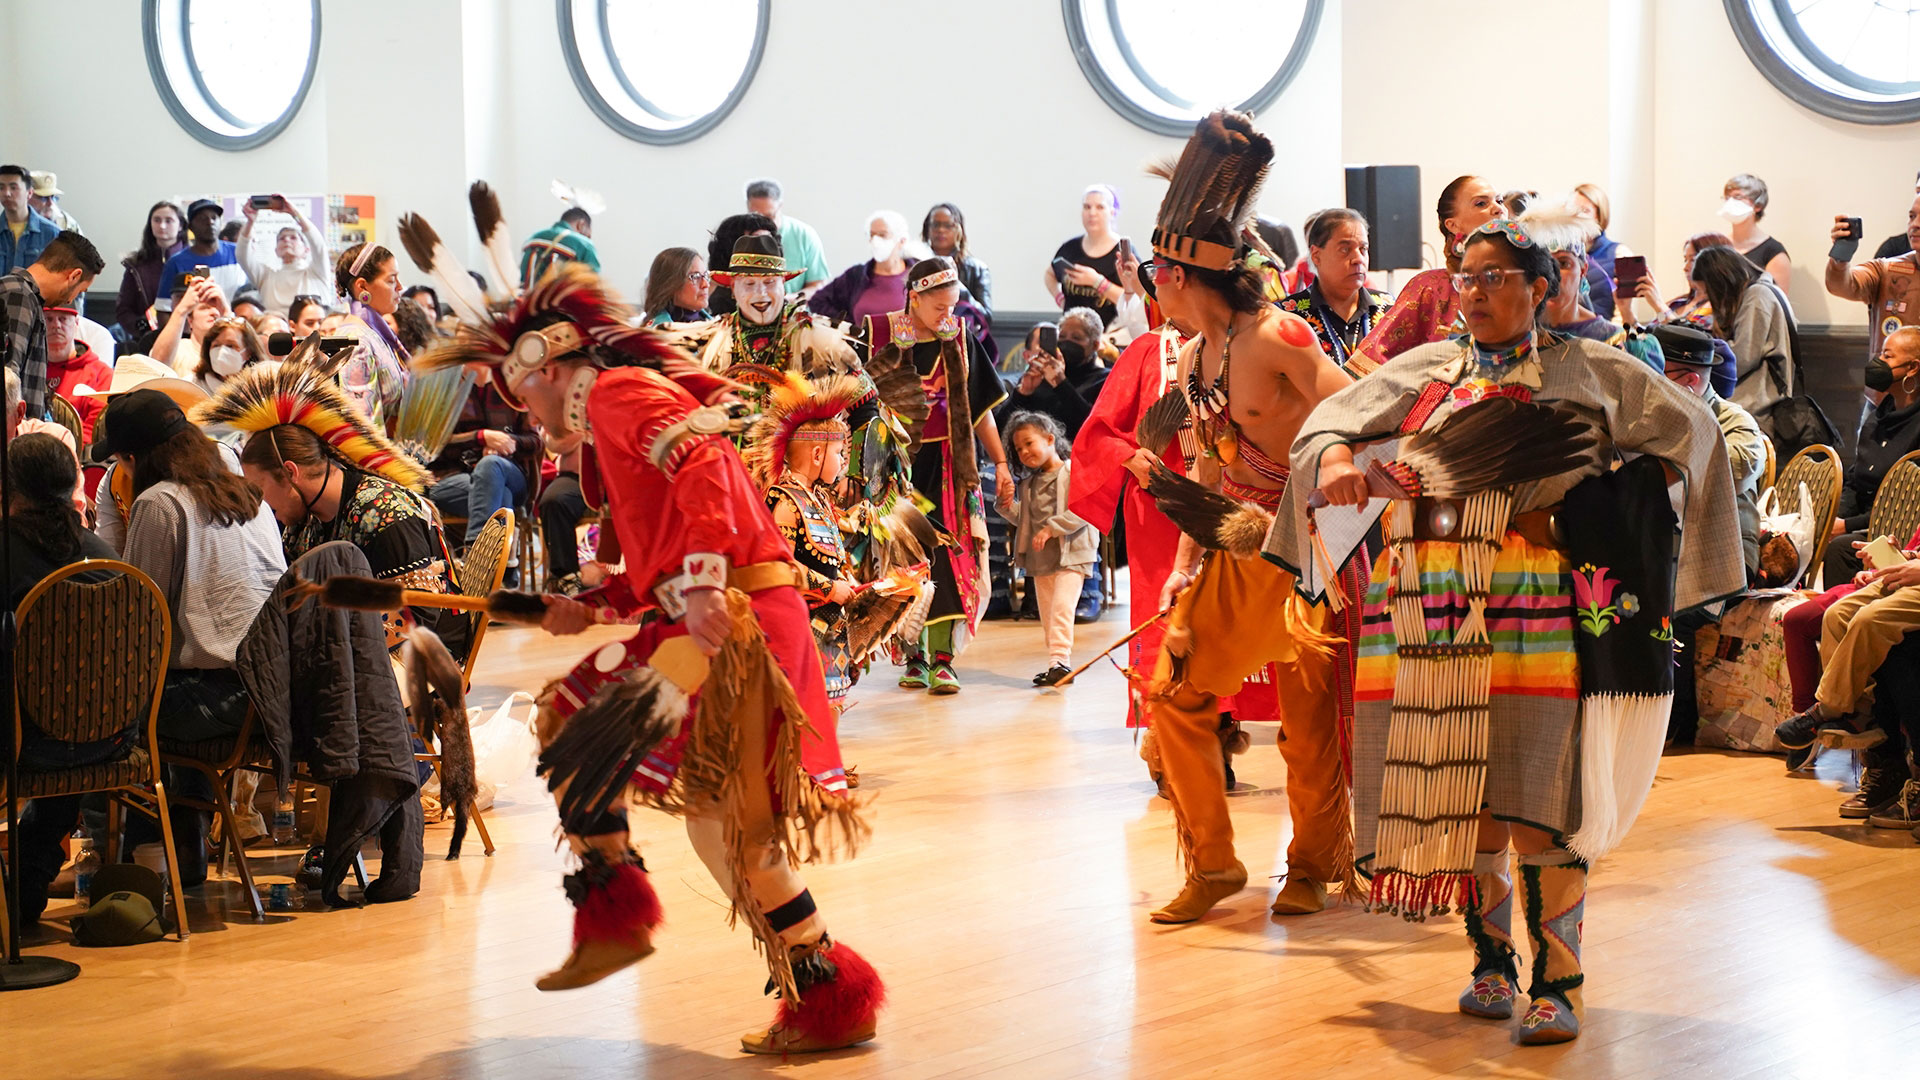 Donning feathers, beads and colorful traditional regalia, Native Americans representing tribes from across the country gathered on Saturday for the first University of Maryland Pow Wow since 2019.